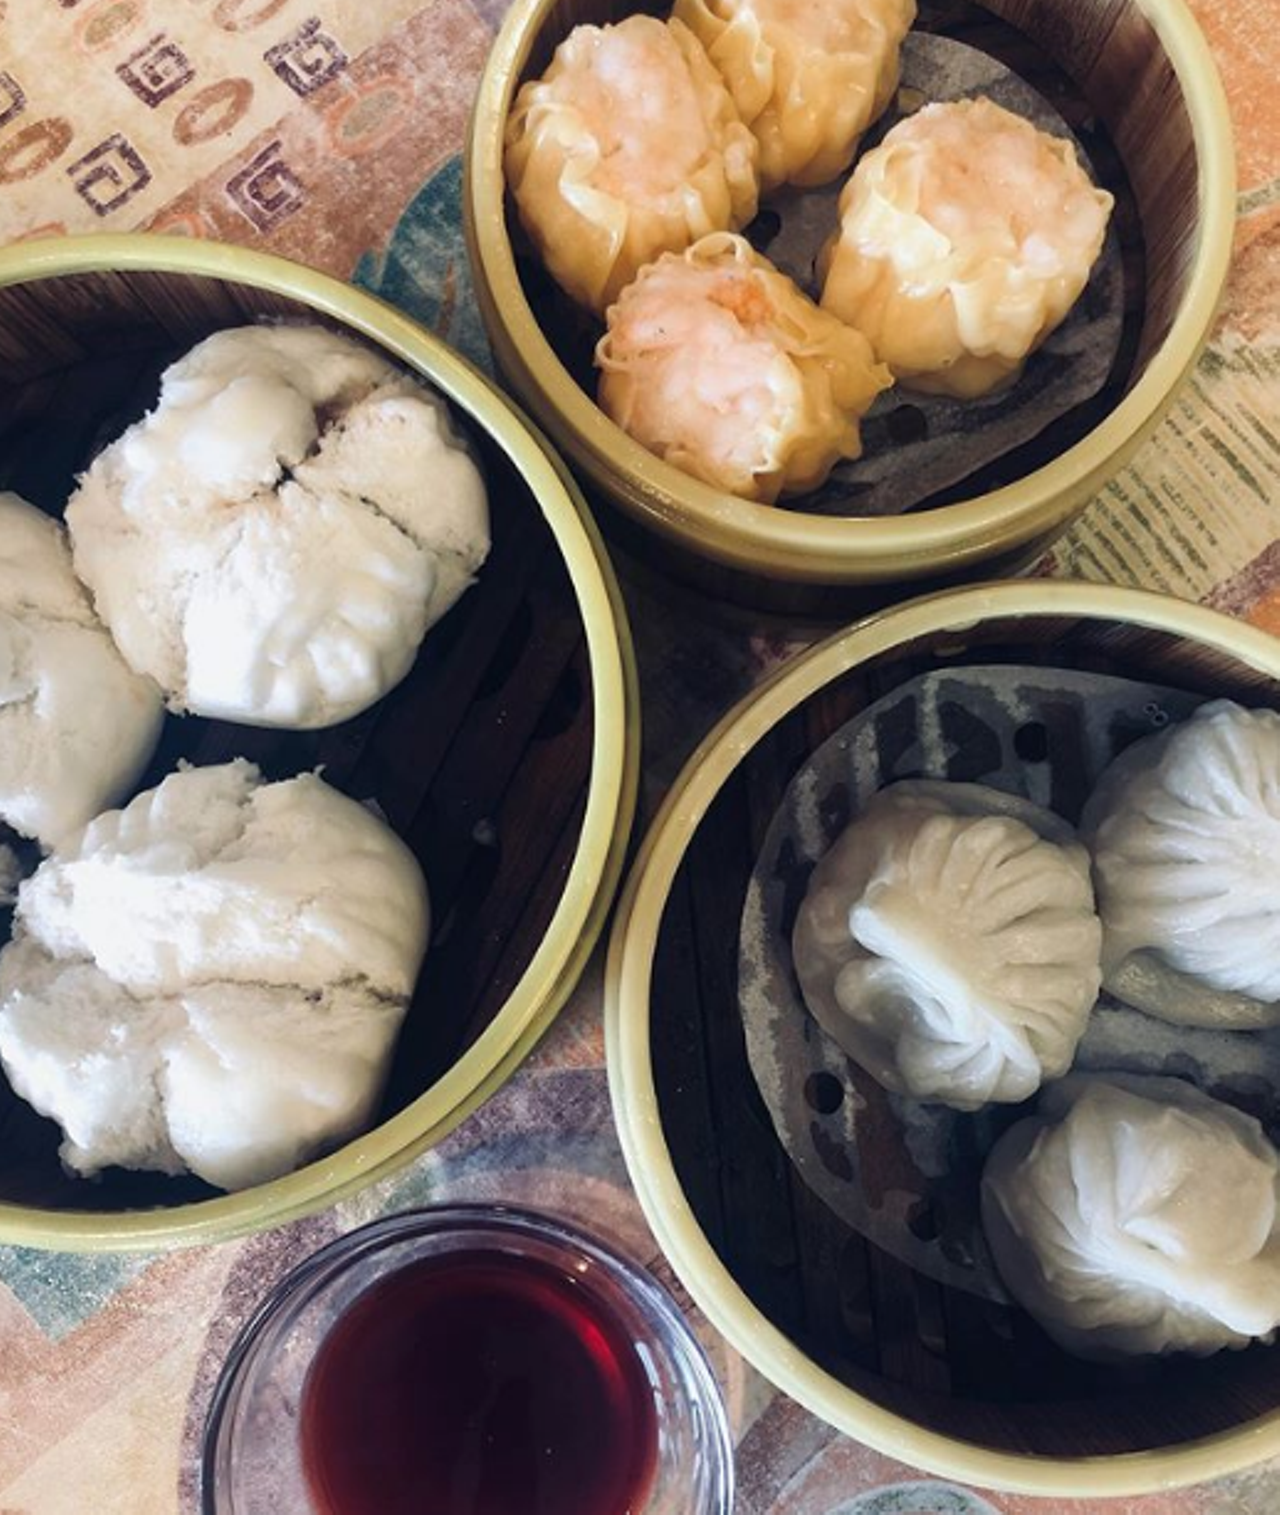 Dim Sum Oriental Cuisine
2313 NW Military Hwy #125, (210) 340-0690
Dim Sum always hits the spot, doesn’t it? Such is especially the case when it comes from Dim Sum Oriental Cuisine. Order up a variety to share with the table so you can taste the best of the restaurant and determine a favorite. It’s not just dim sum here, but also lo mein, soups and meat-based plates paired with dried rice.
Photo by mgphototx via Instagram / medic740